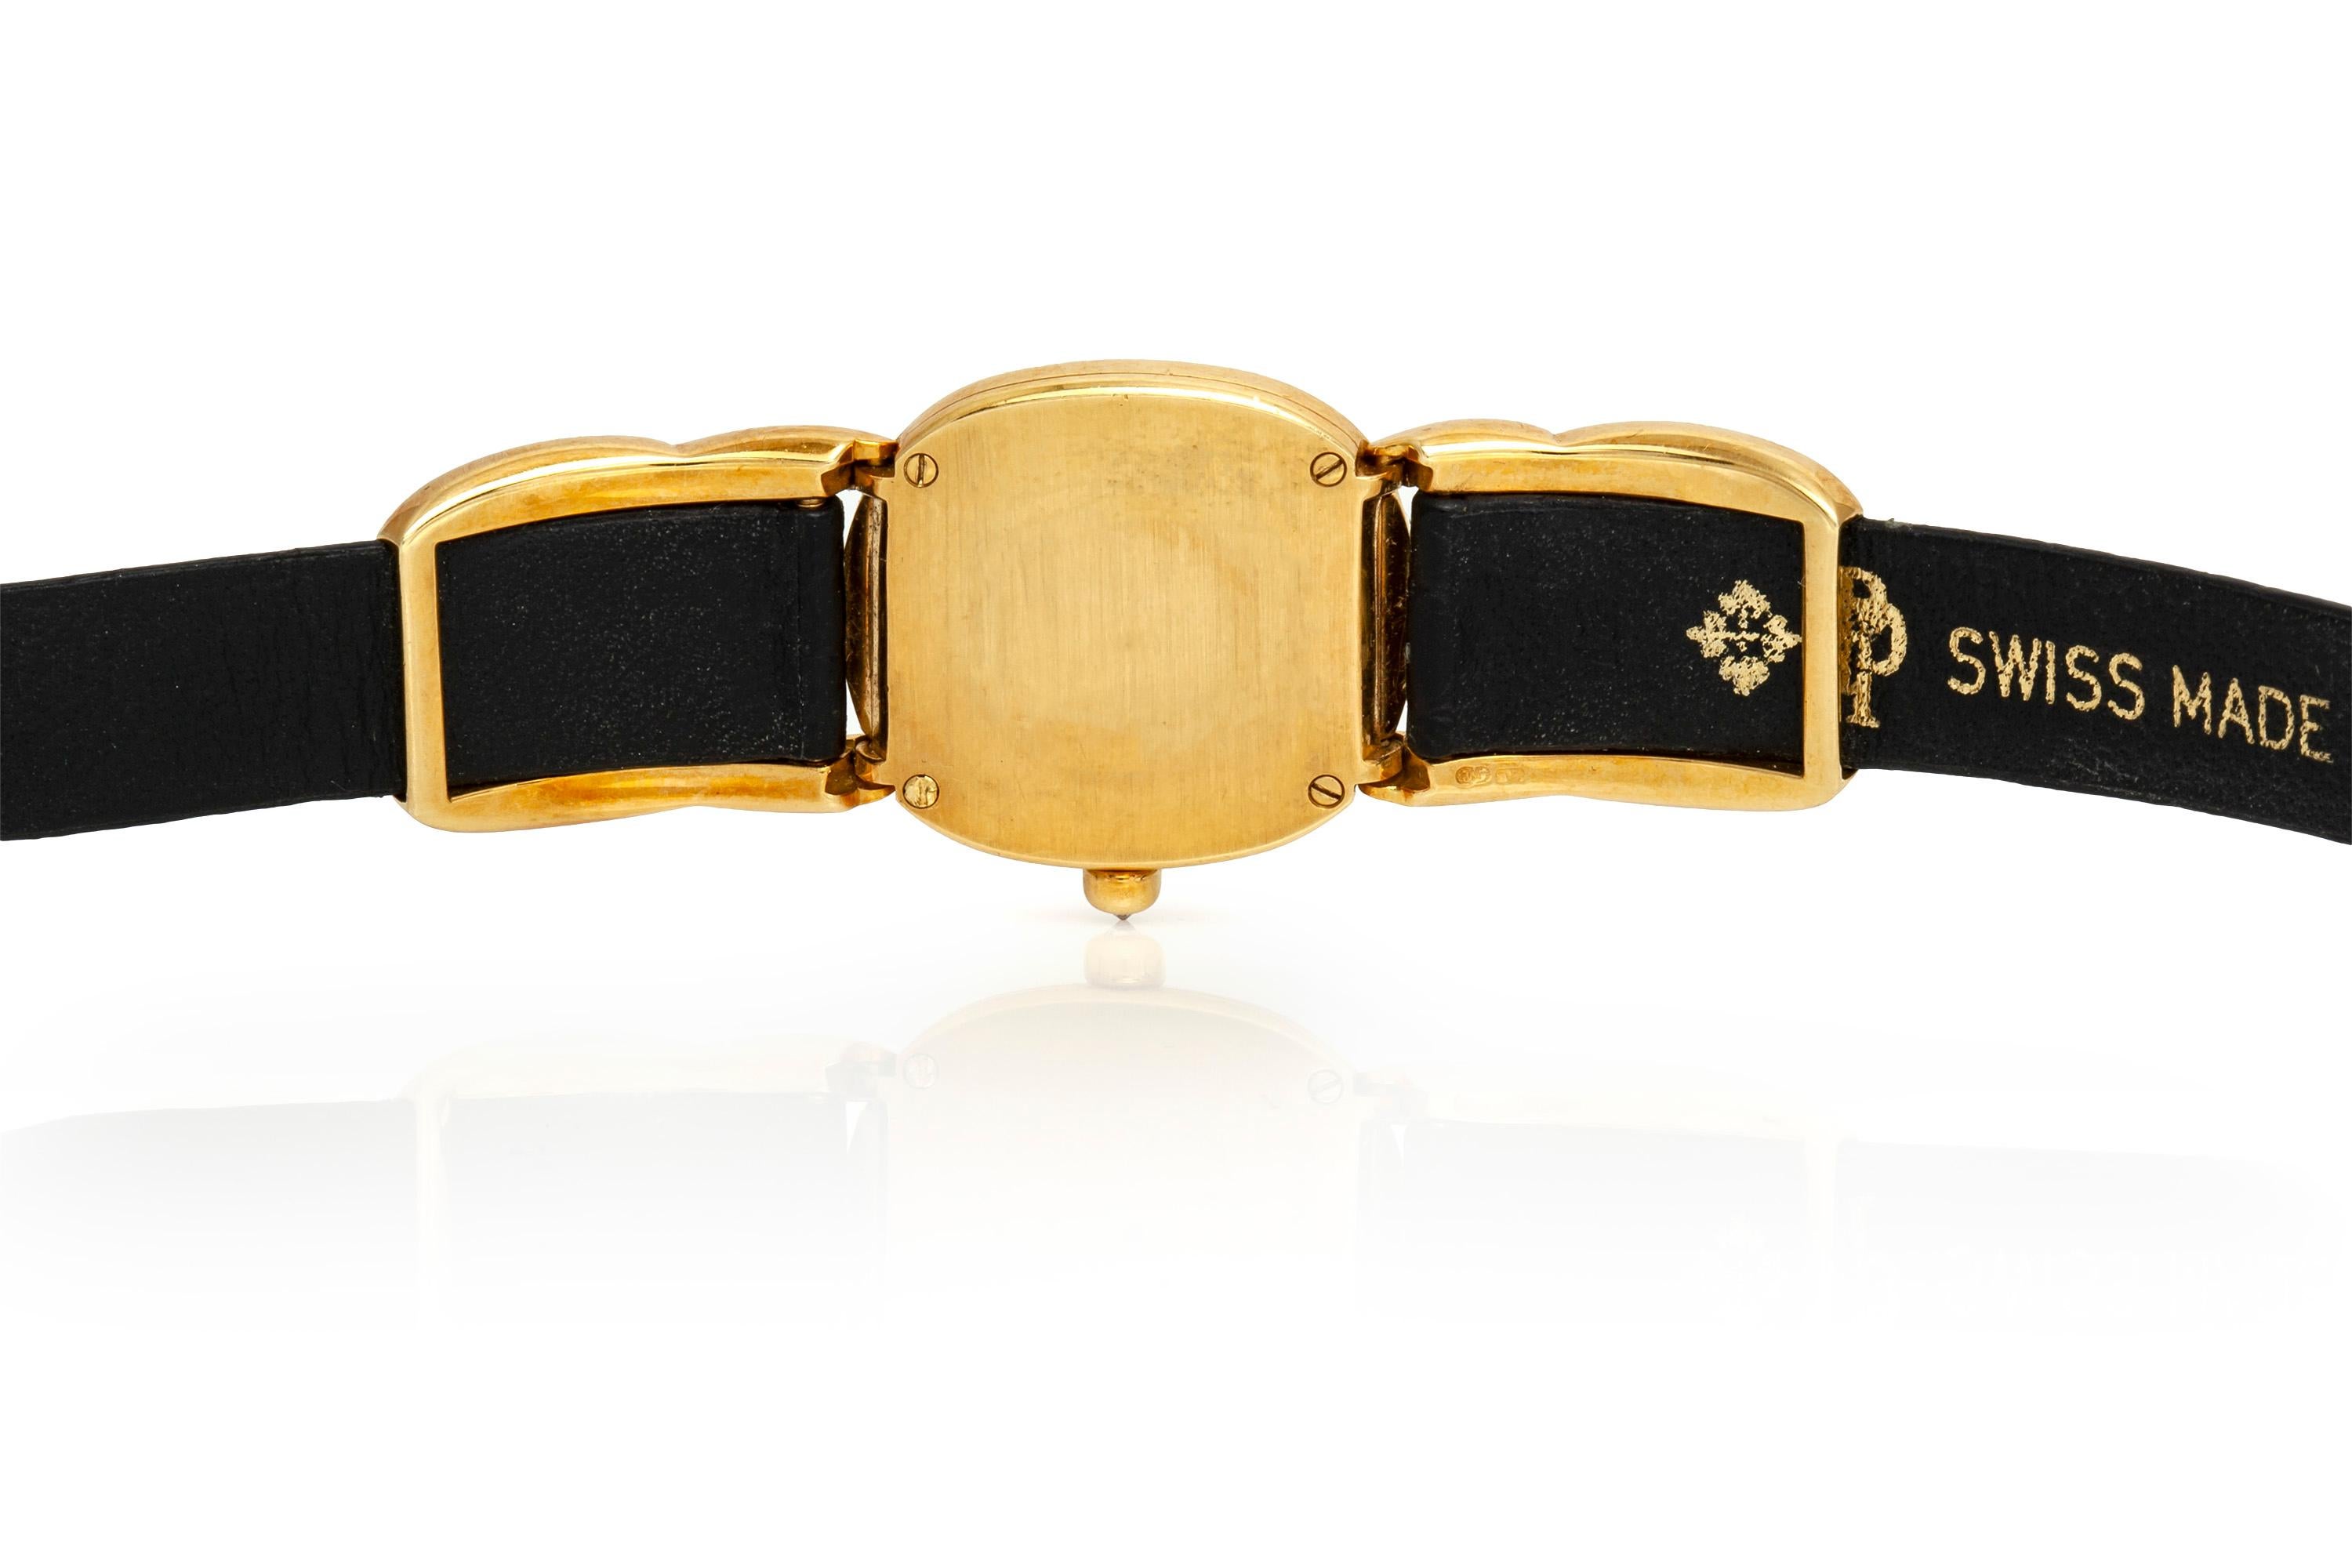 Patek Philippe watch, finely crafted in 18k yellow gold with diamonds and original strap.